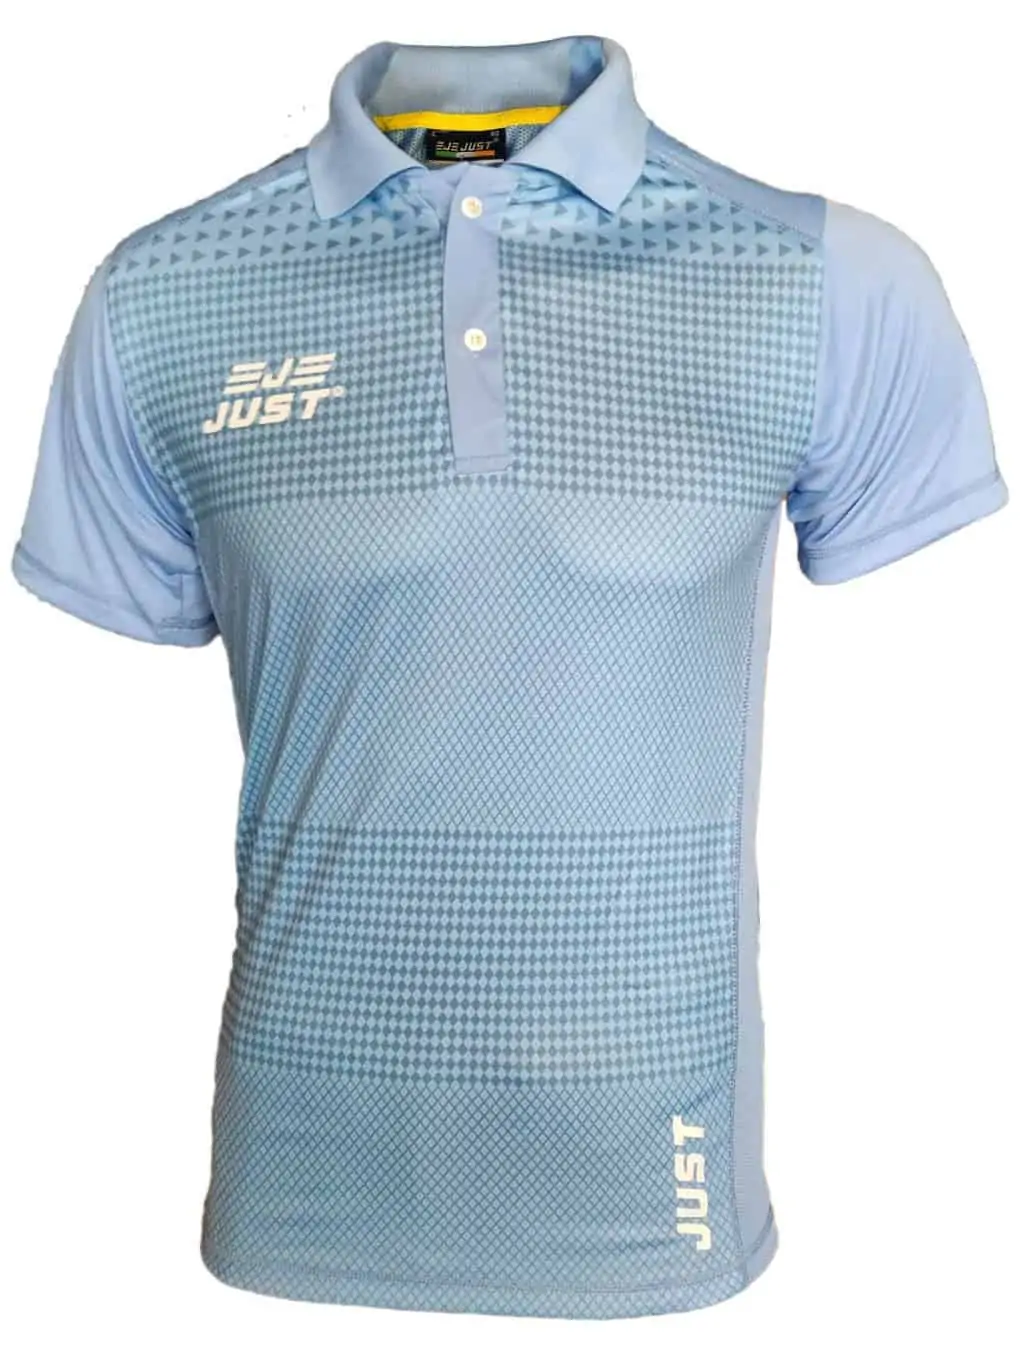 JUST MASTER T-SHIRT (Sublimated, Dry Fit, Sweat Absorbing)